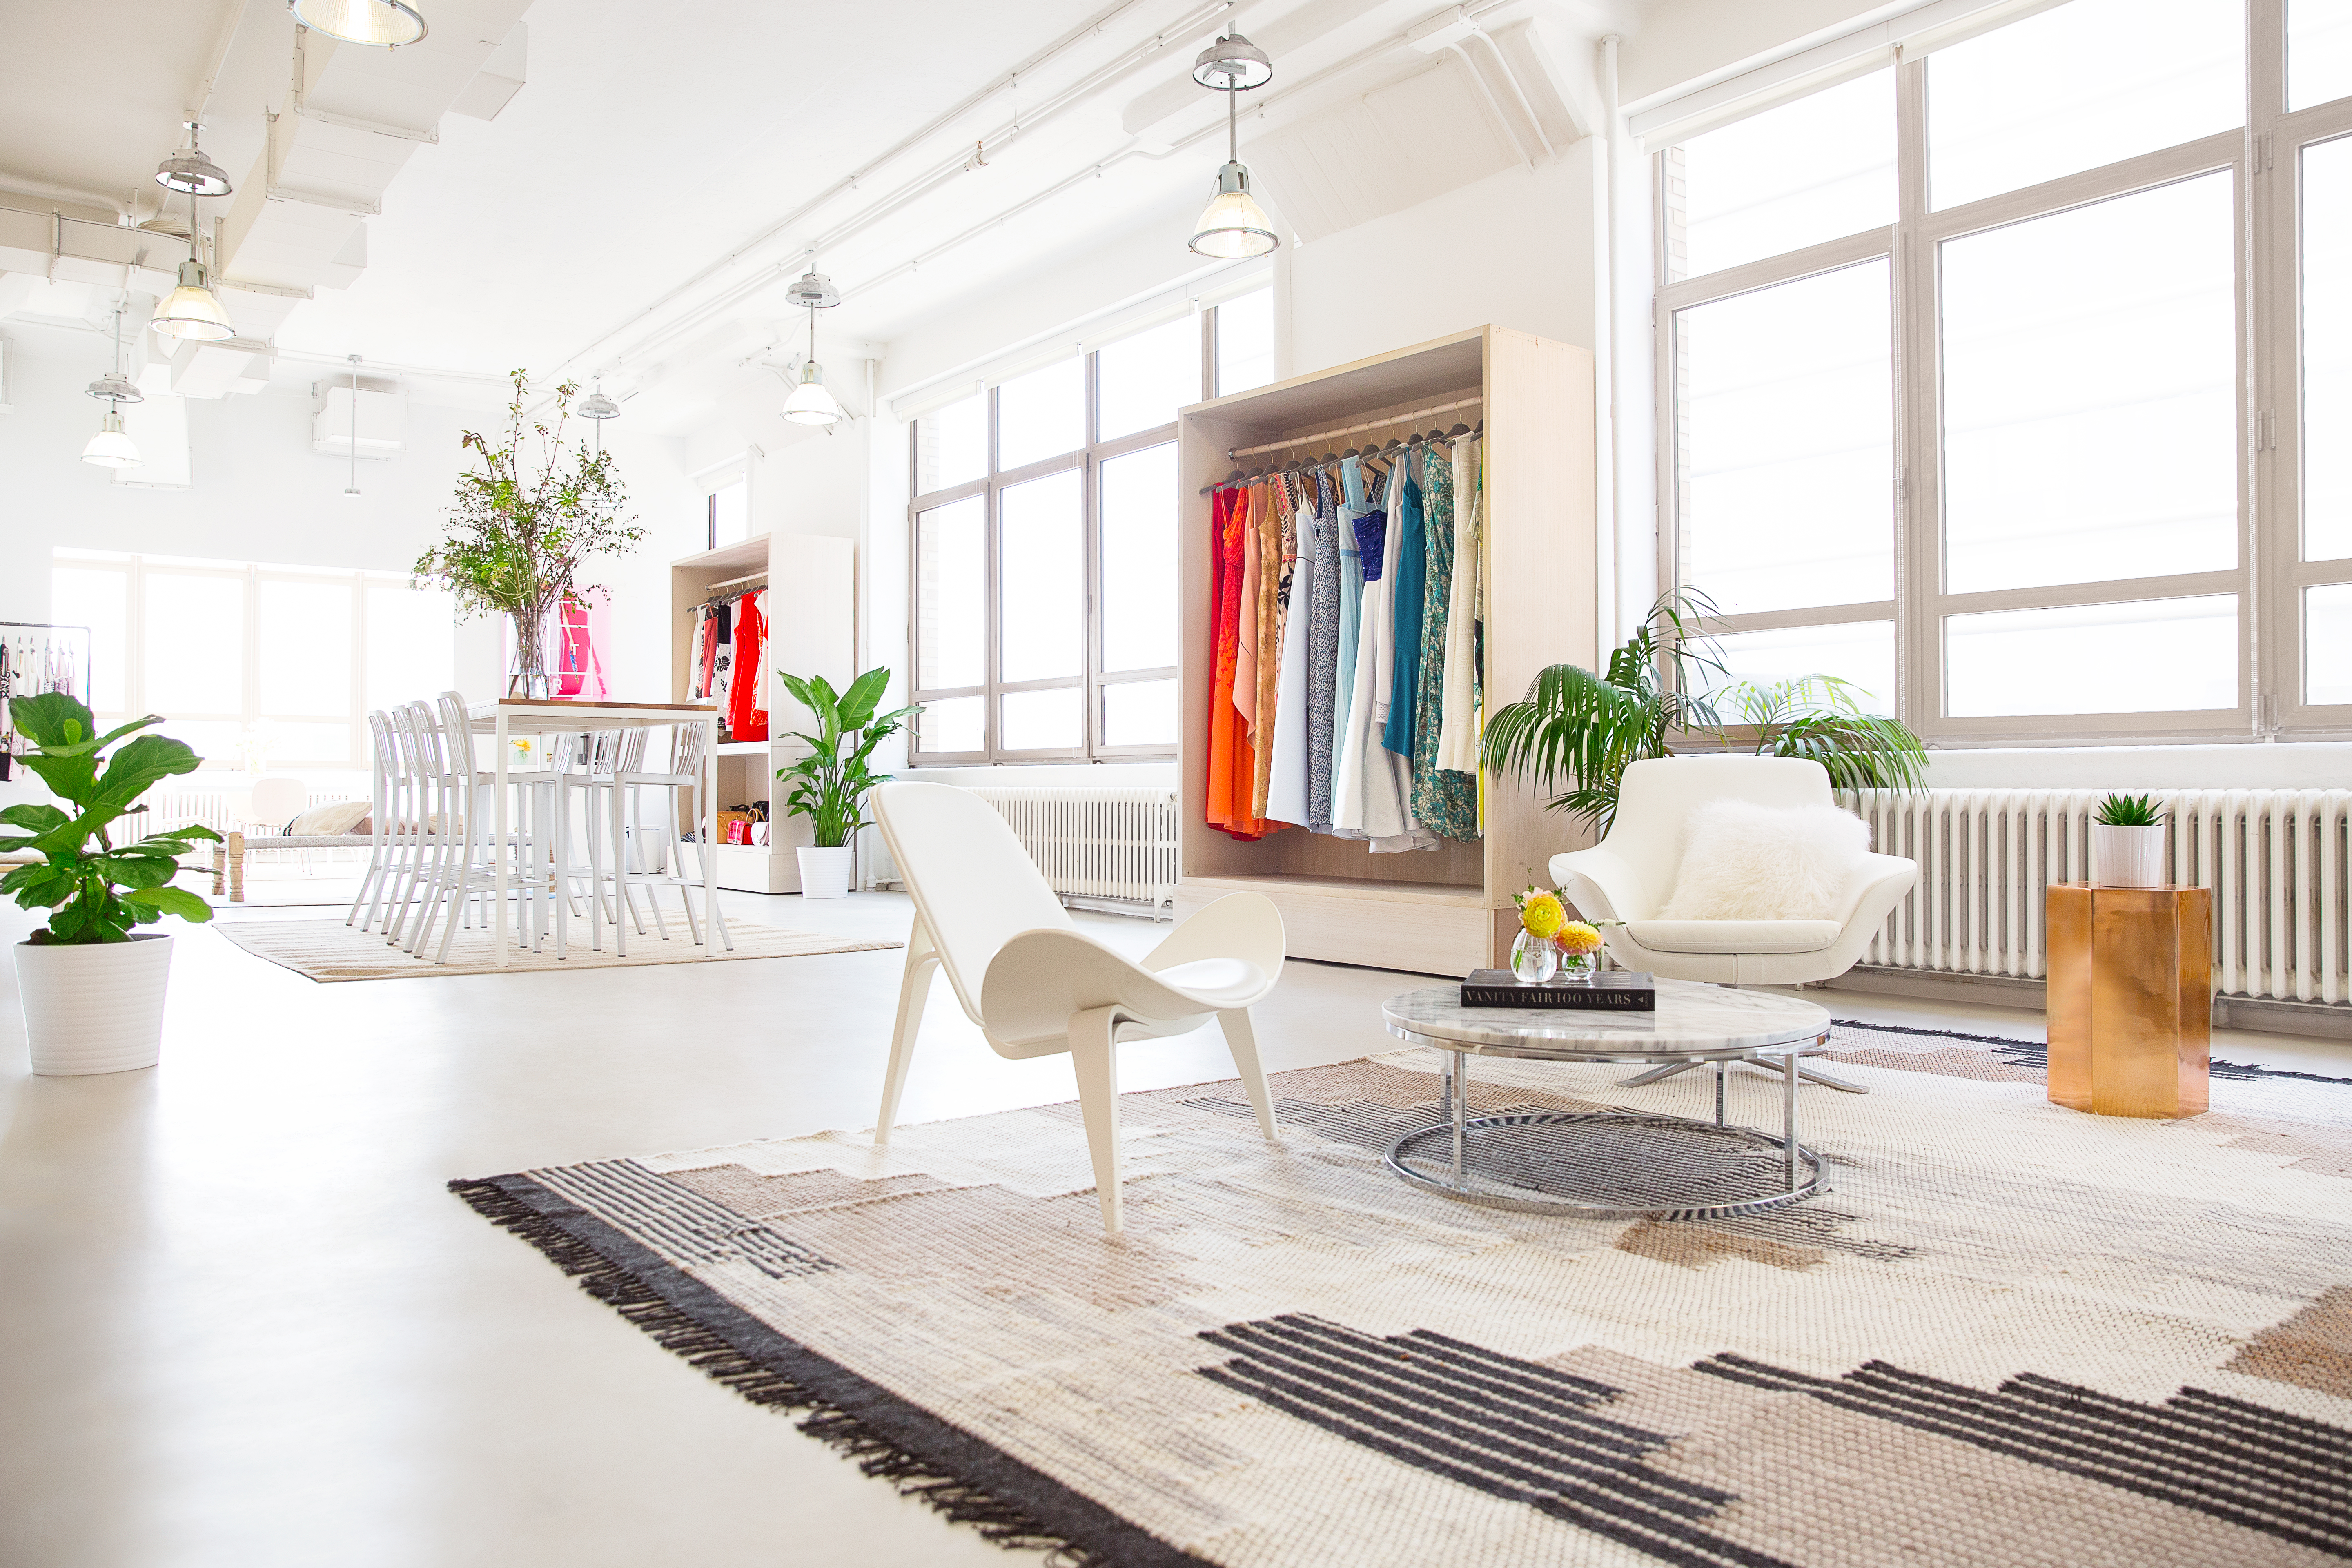 The bright, mostly white Rent the Runway style studio